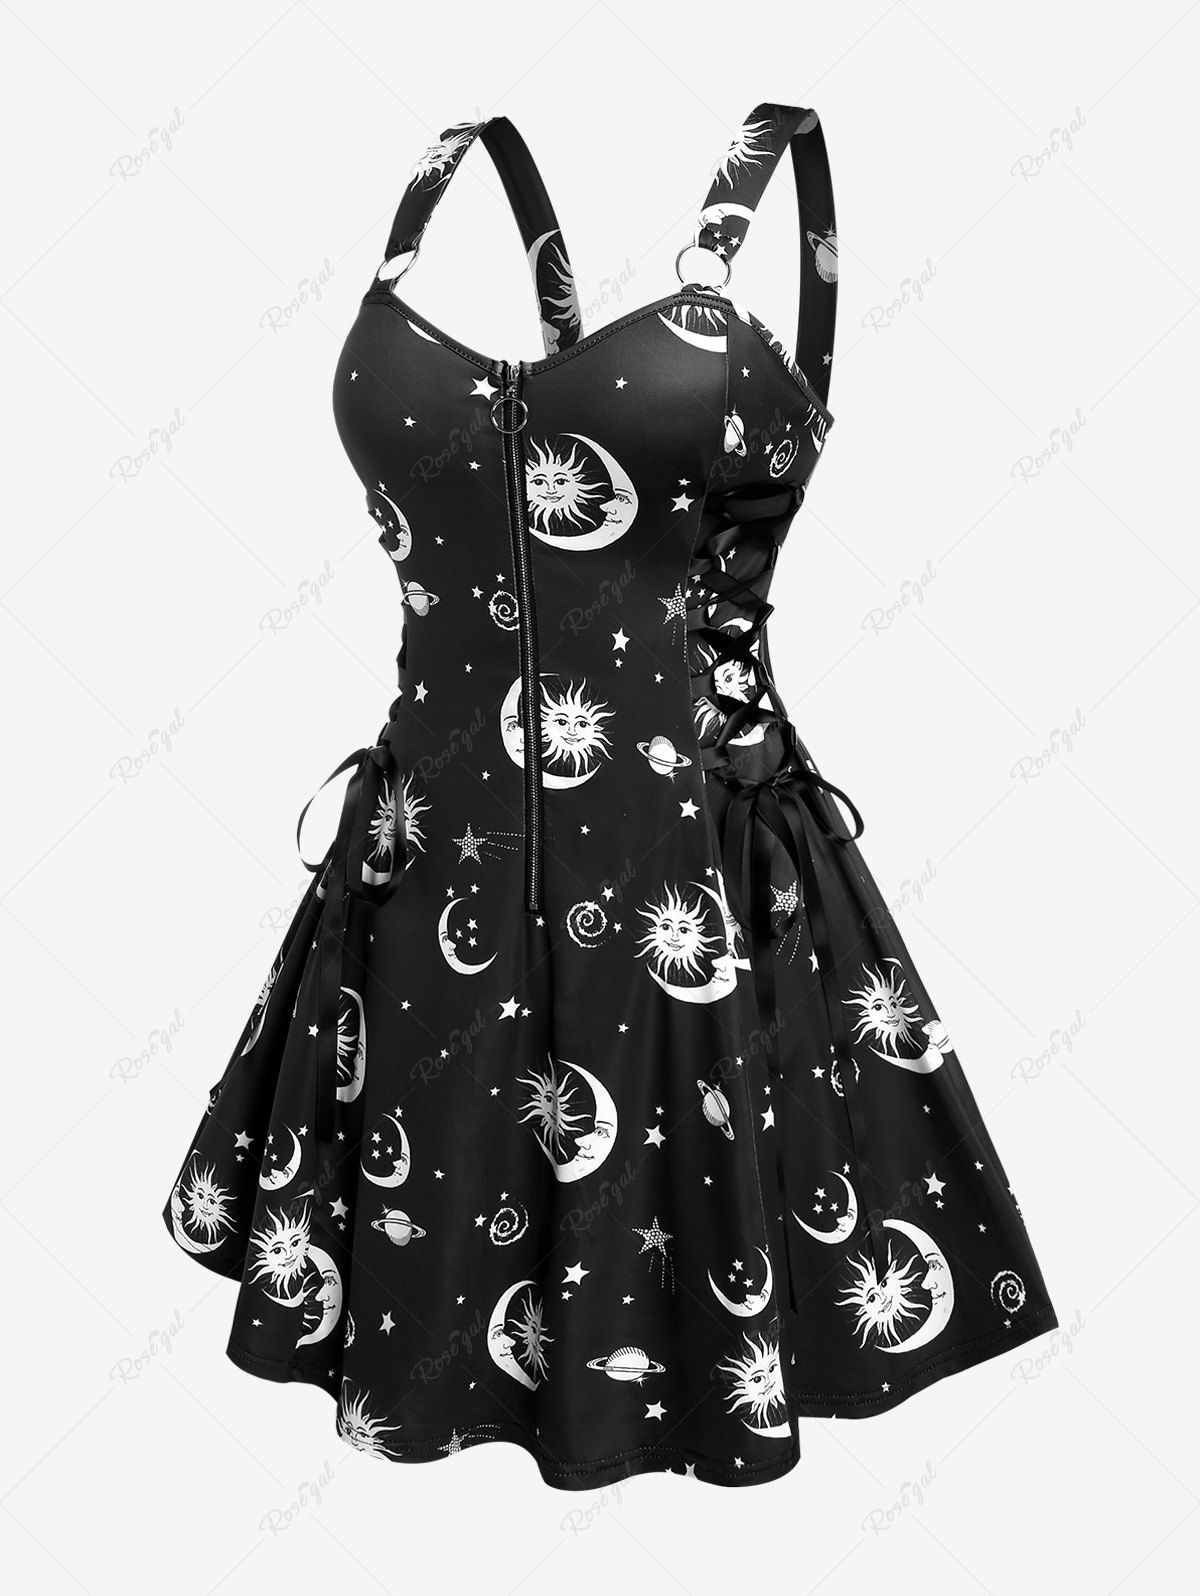 New Plus Size Half Zipper Backless Moon Sun Printed Lace Up A Line Dress  